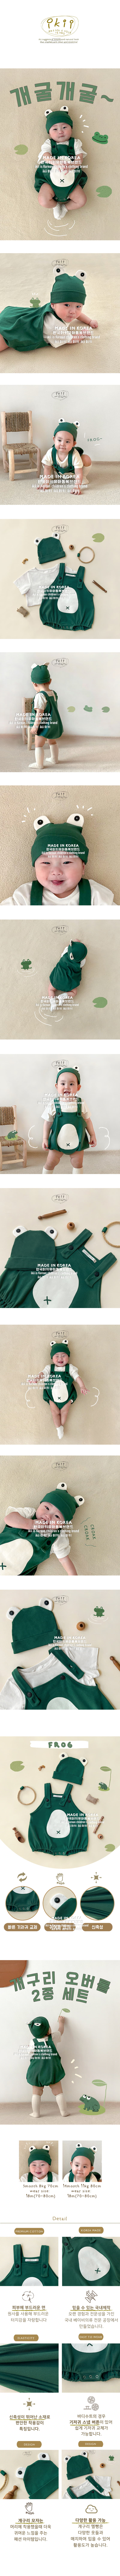 Ikii - Korean Baby Fashion - #babyboutique - Frog Overalls Bodysuit with Hat